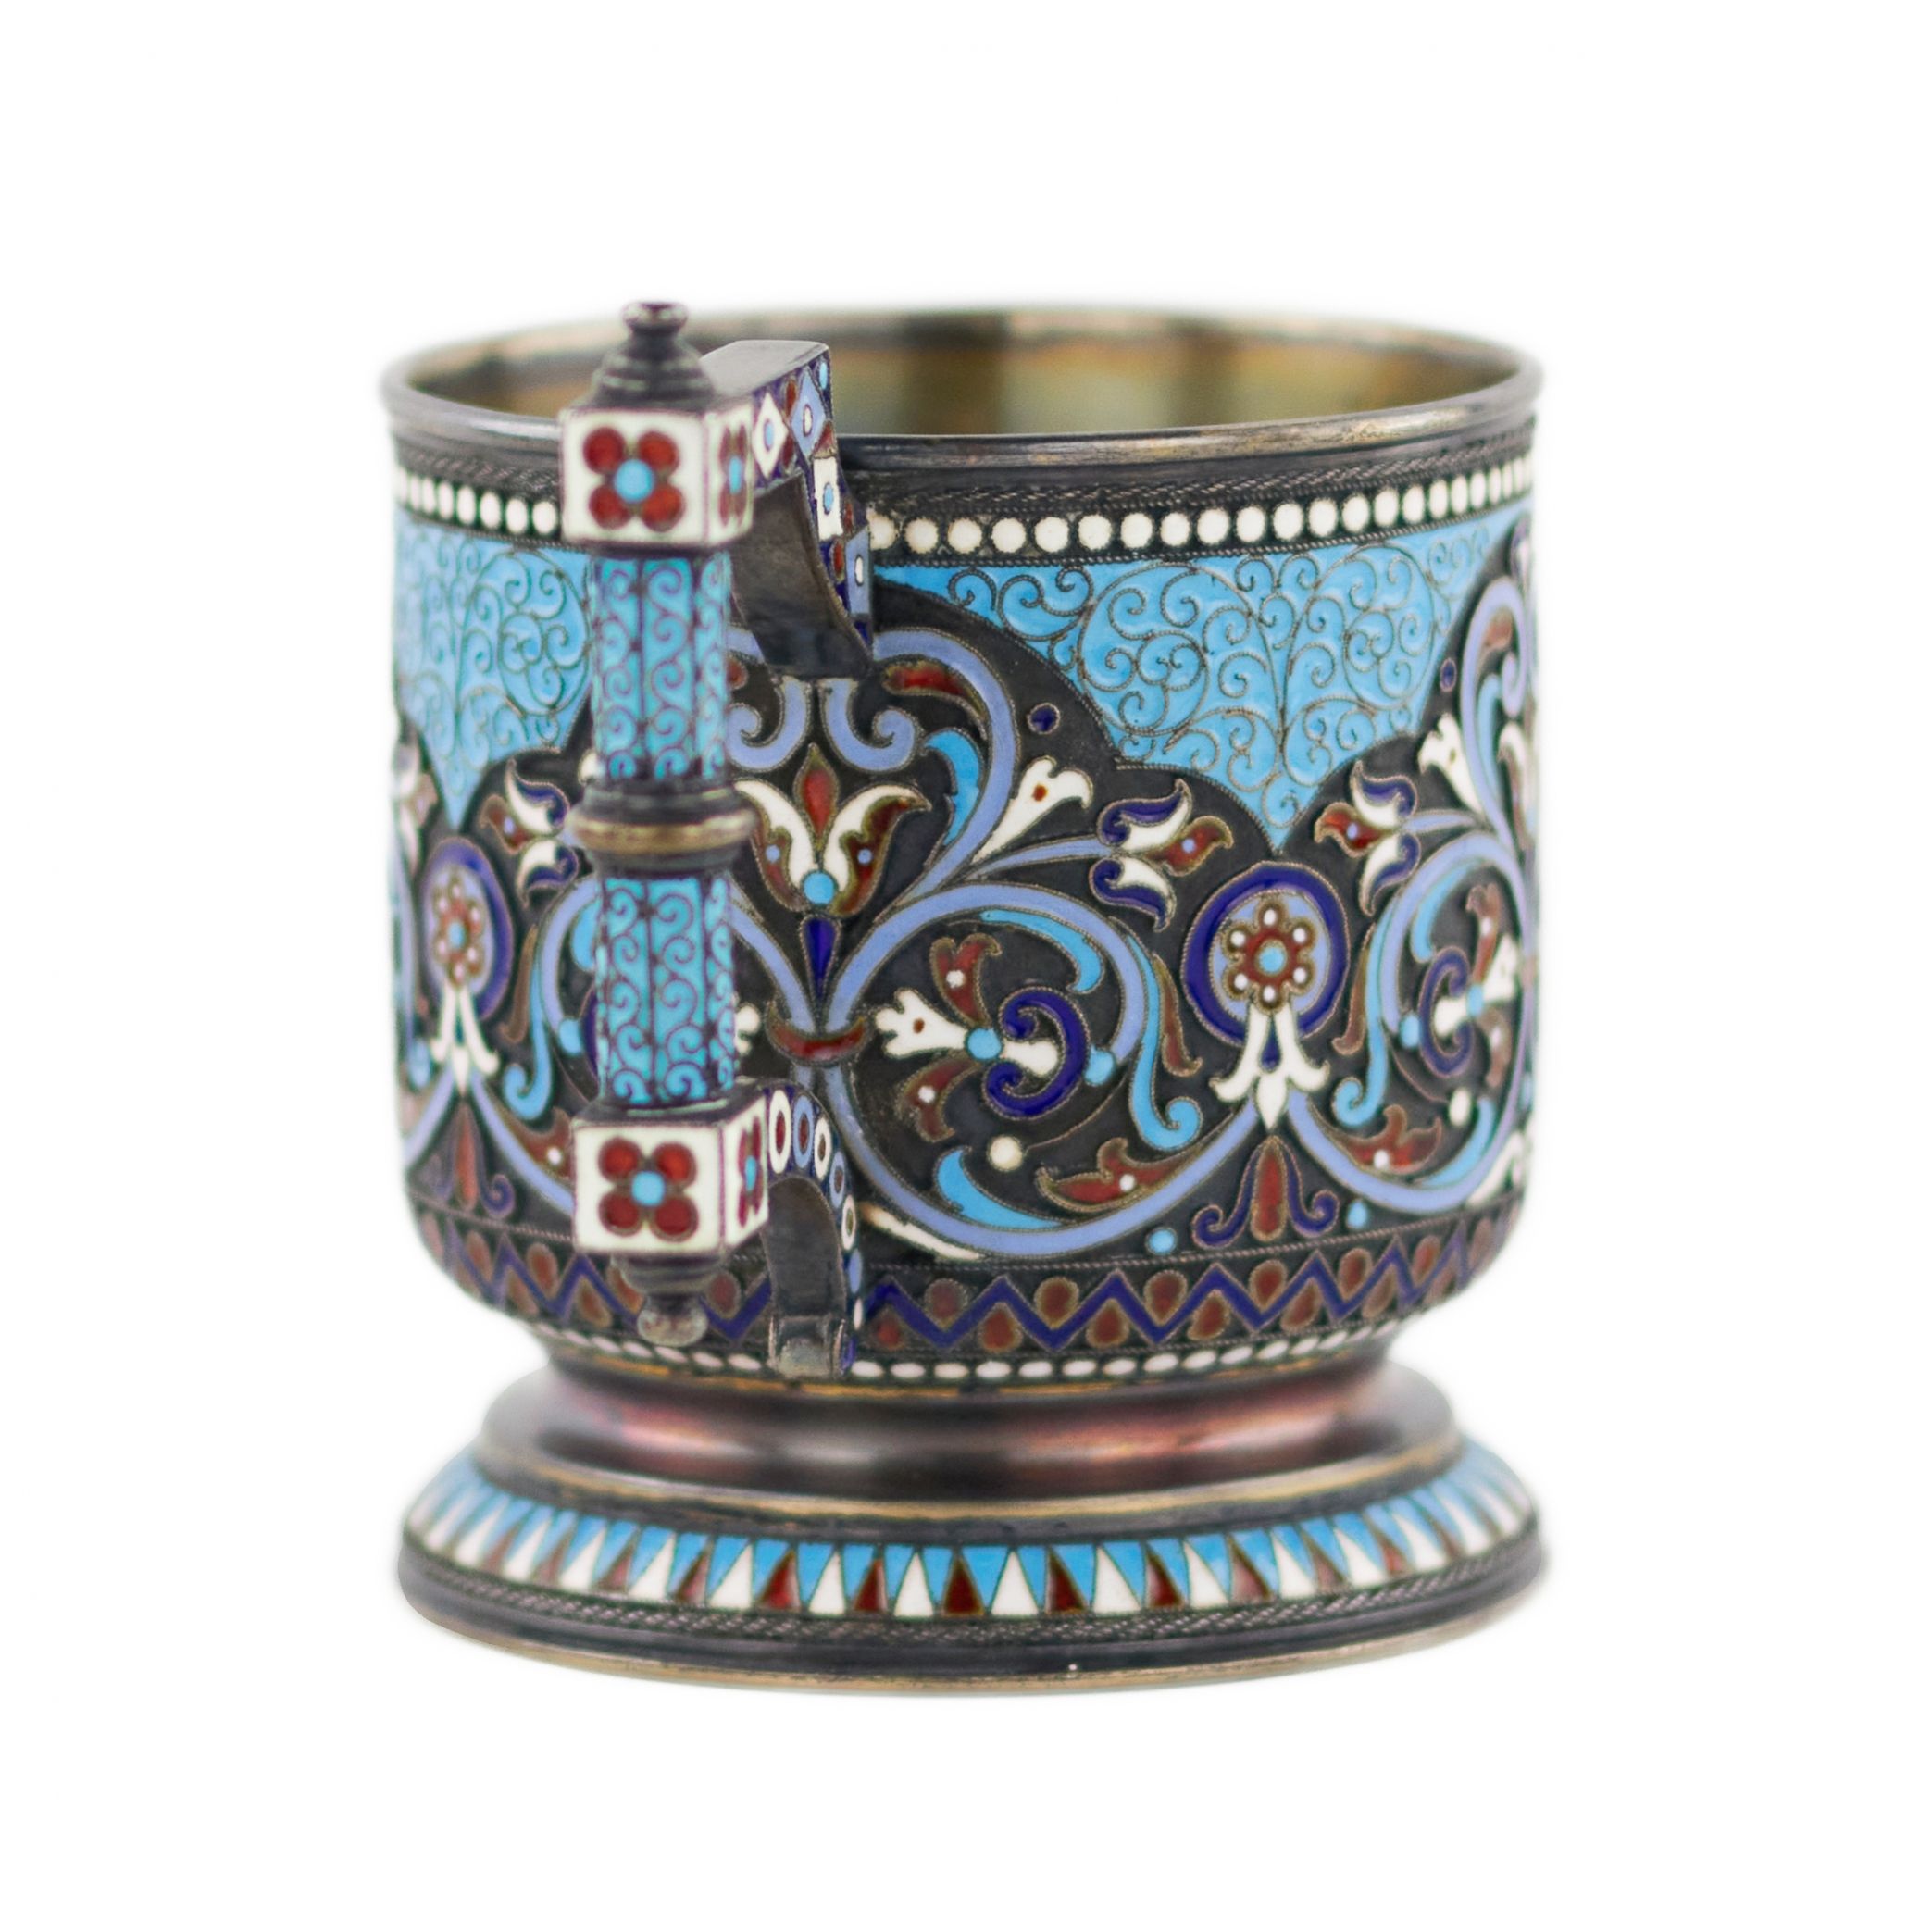 Nikolay ALEXEEV, silver cloisonne enamel glass holder in neo-Russian style. 1895 - Image 3 of 9